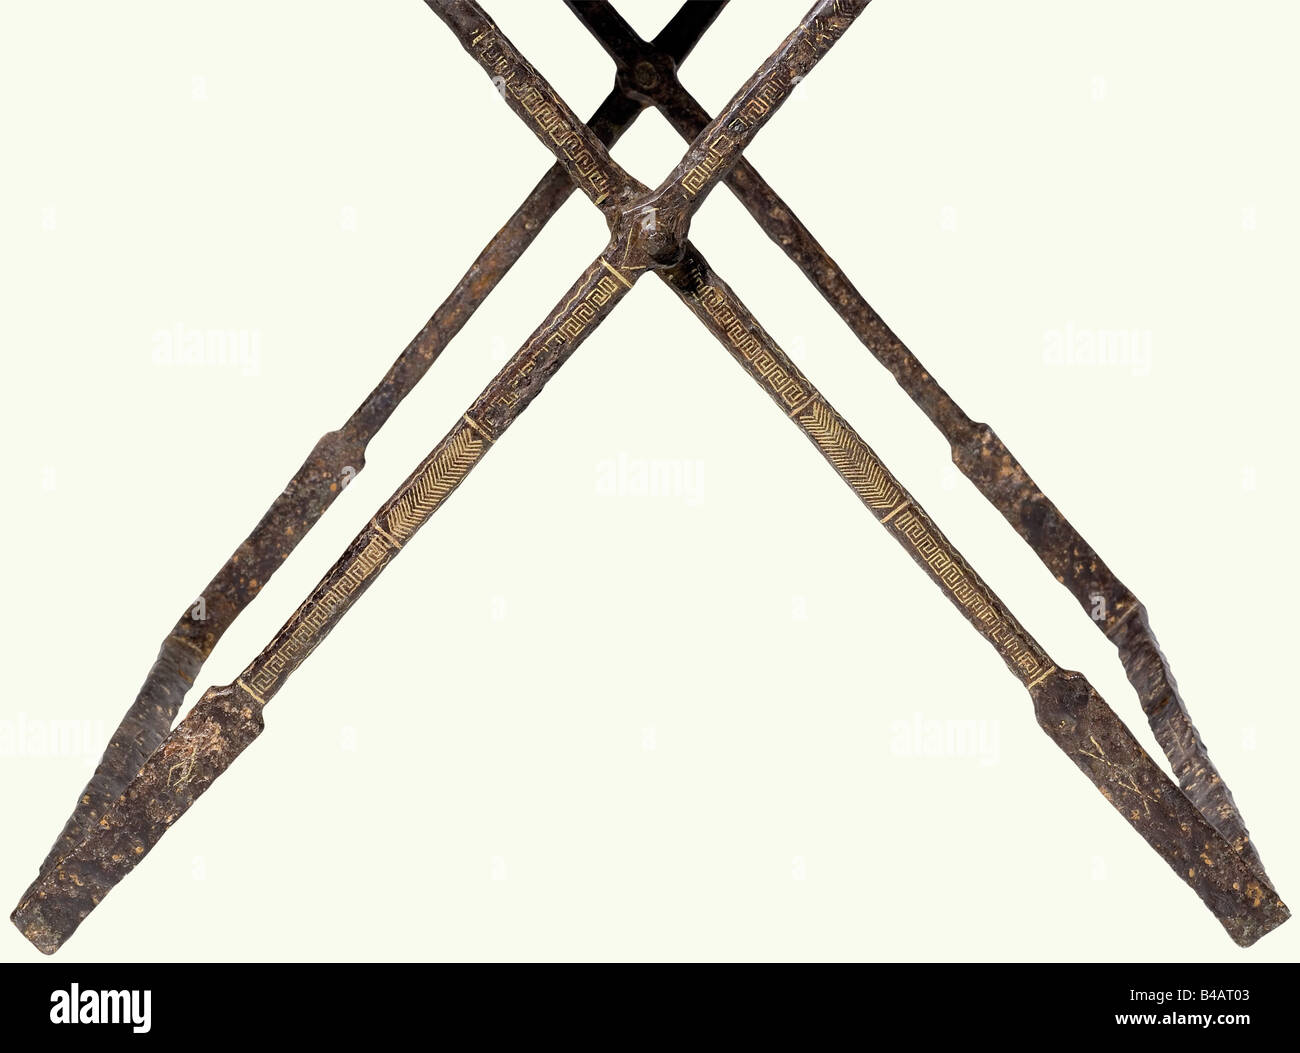 A folding iron chair for a Field Commander, Late Roman/Early Byzantine, 3rd - 4th century A.D. Iron with fine bronze and silver inlay. Folding frame of square bars, with the supporting sides and the upper edges becoming rectangular in section. On each side of the top there are five ring fittings to accept the passage of iron bars to attach the (replacement leather) seat. There are remnants of the bronze decorative inlay on the sides, with meanders, angles, and wave or historic, historical, ancient world, ancient world, ancient times, object, objects, stills, cl, Stock Photo